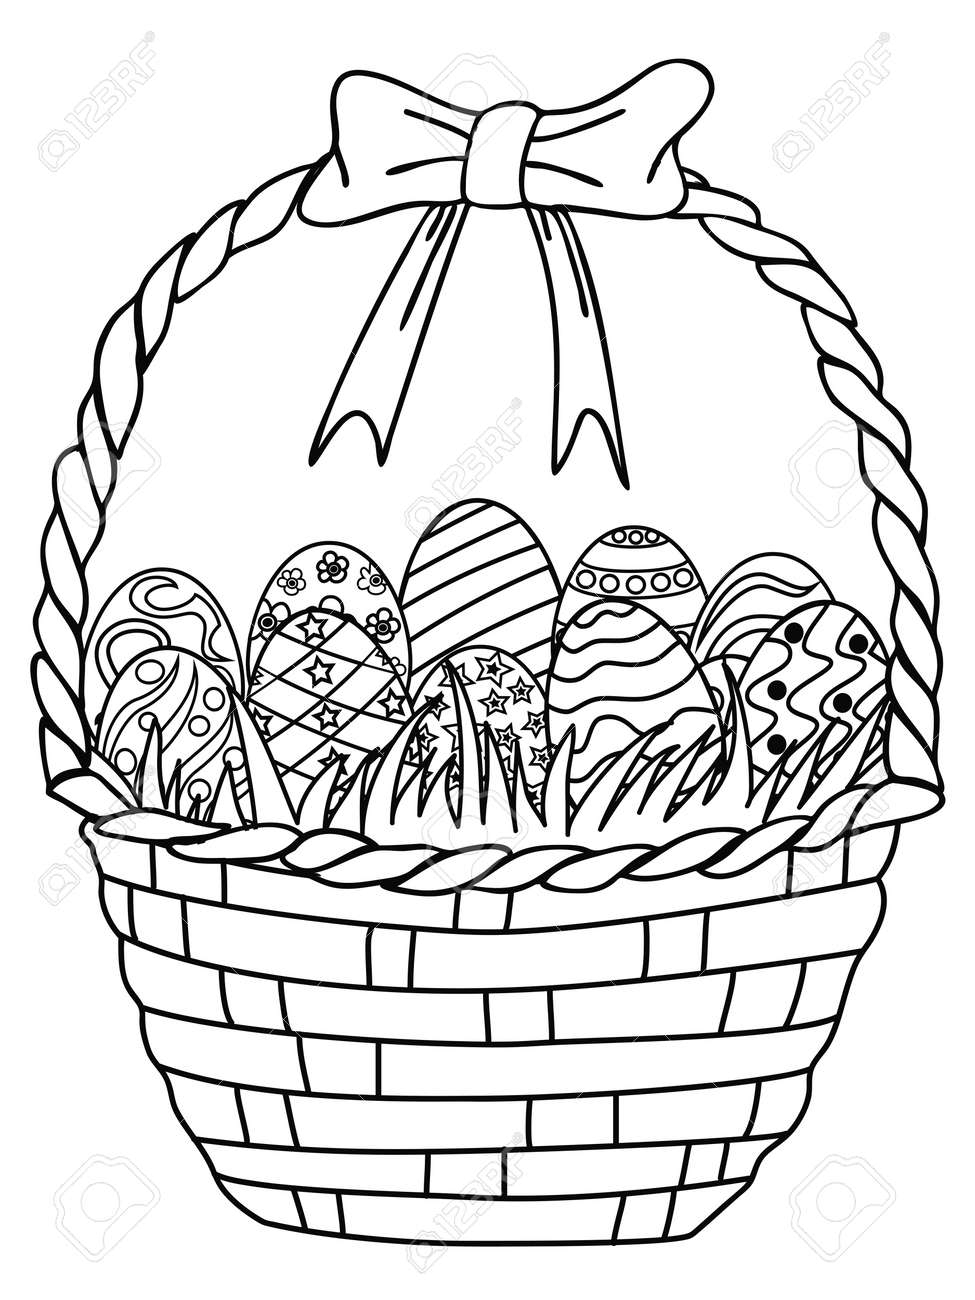 Isolated hand drawn basket of easter eggs outlinecoloring page on white background royalty free svg cliparts vectors and stock illustration image